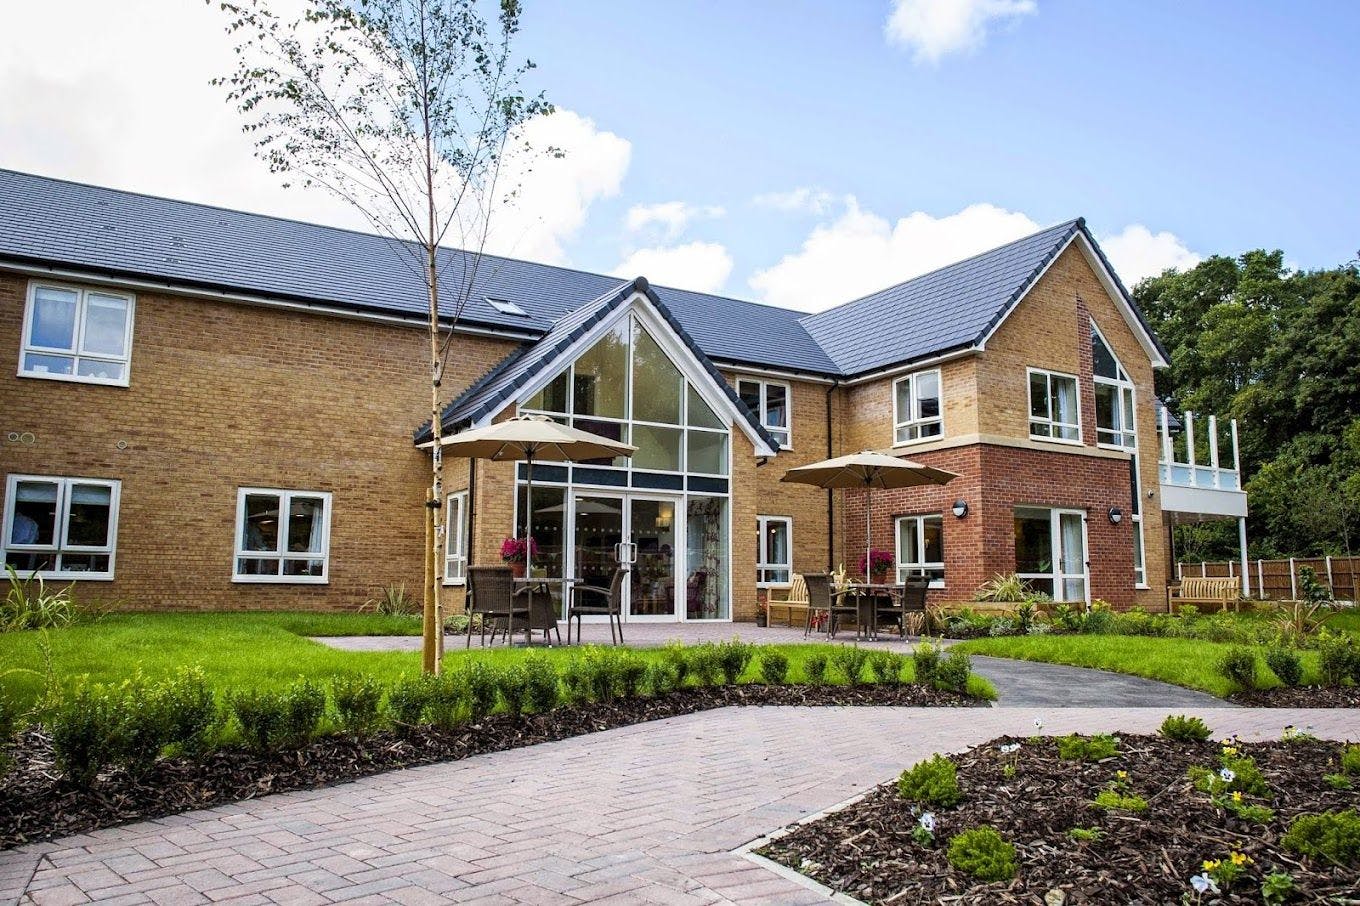 Exterior of Sutton Grange Care Home in Southport, Merseyside